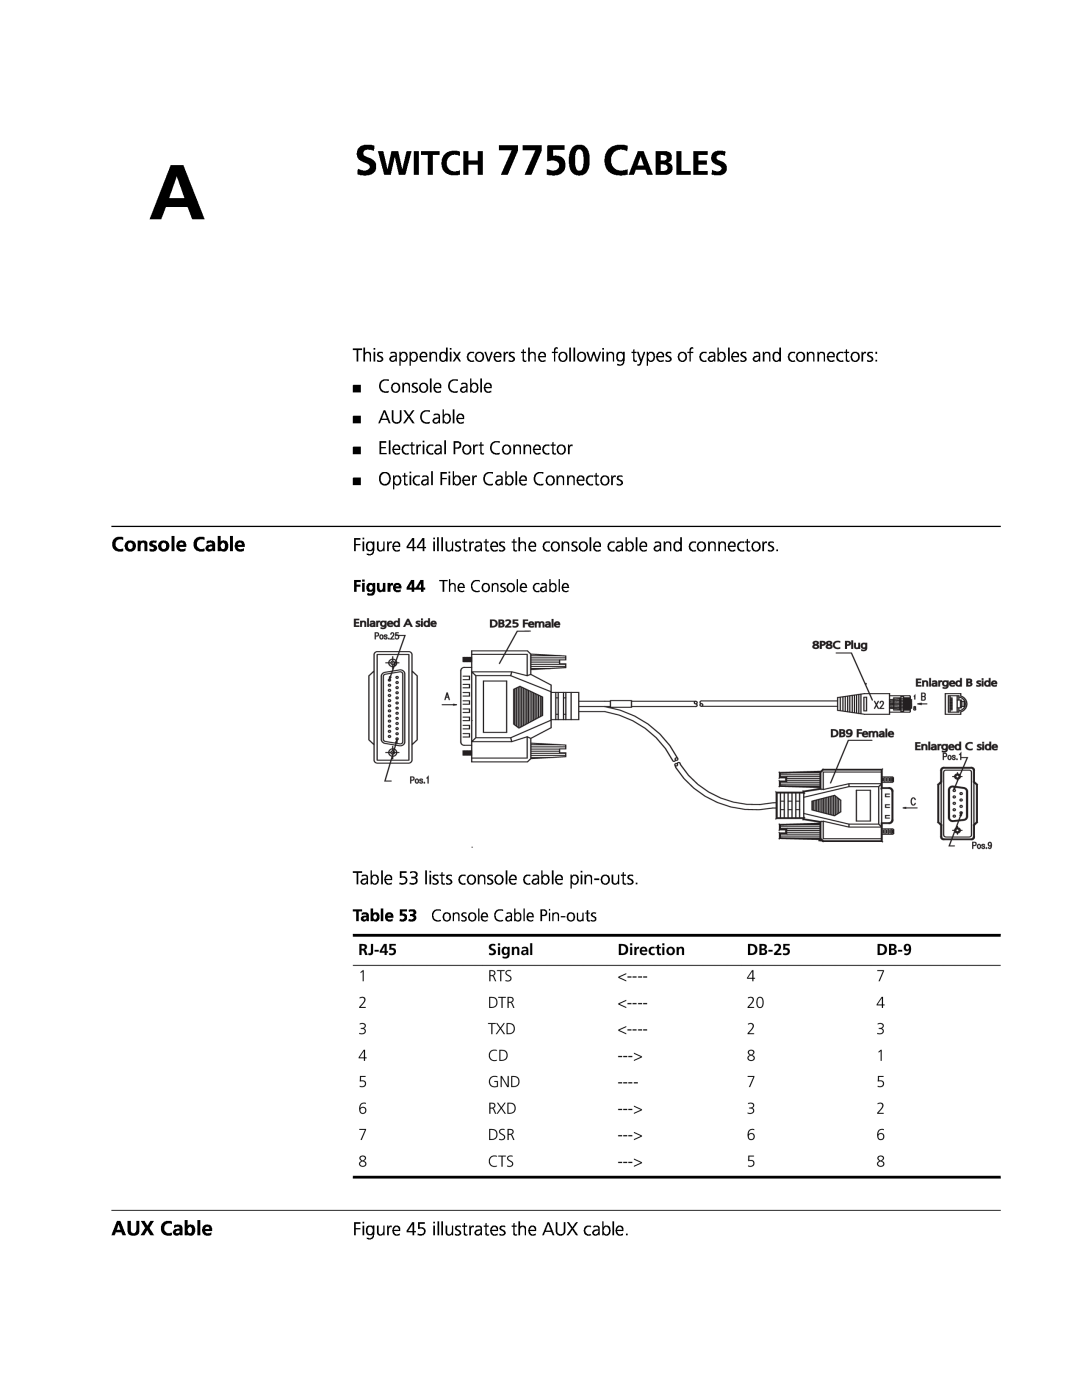 3Com 3C16894 4-slot Chassis SWITCH 7750 CABLES, AUX Cable, The Console cable, Console Cable Pin-outs, Enlarged A side 